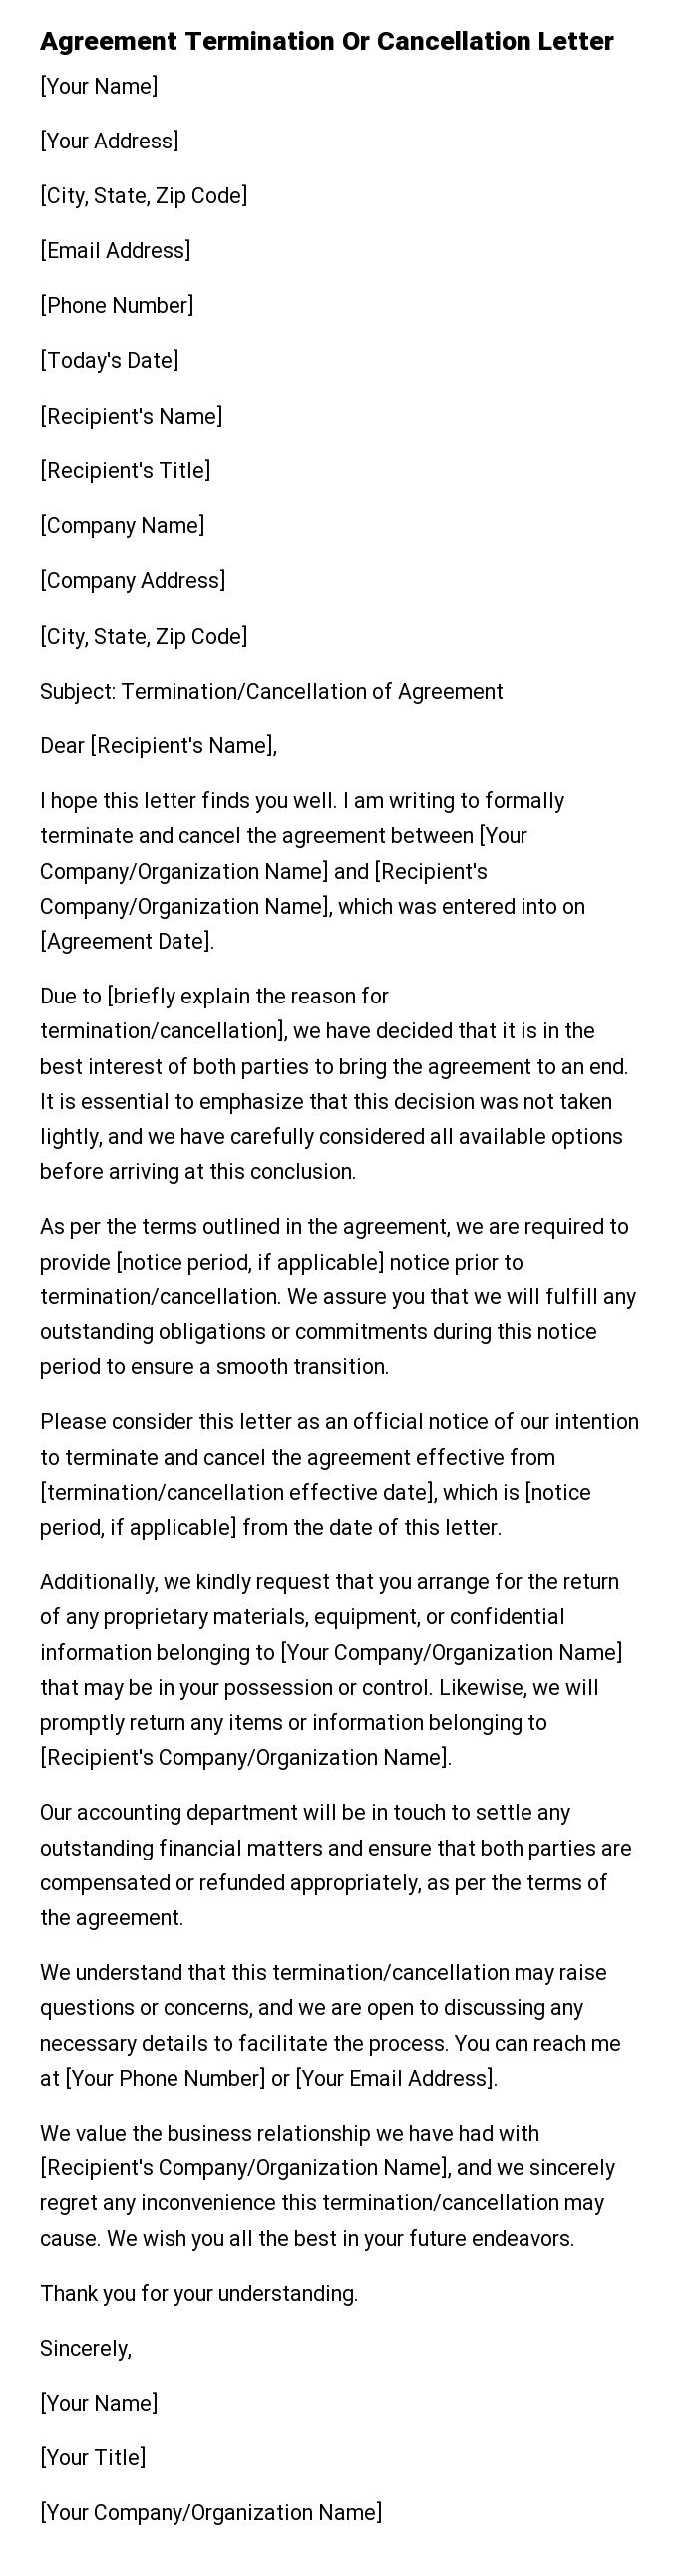 Agreement Termination Or Cancellation Letter